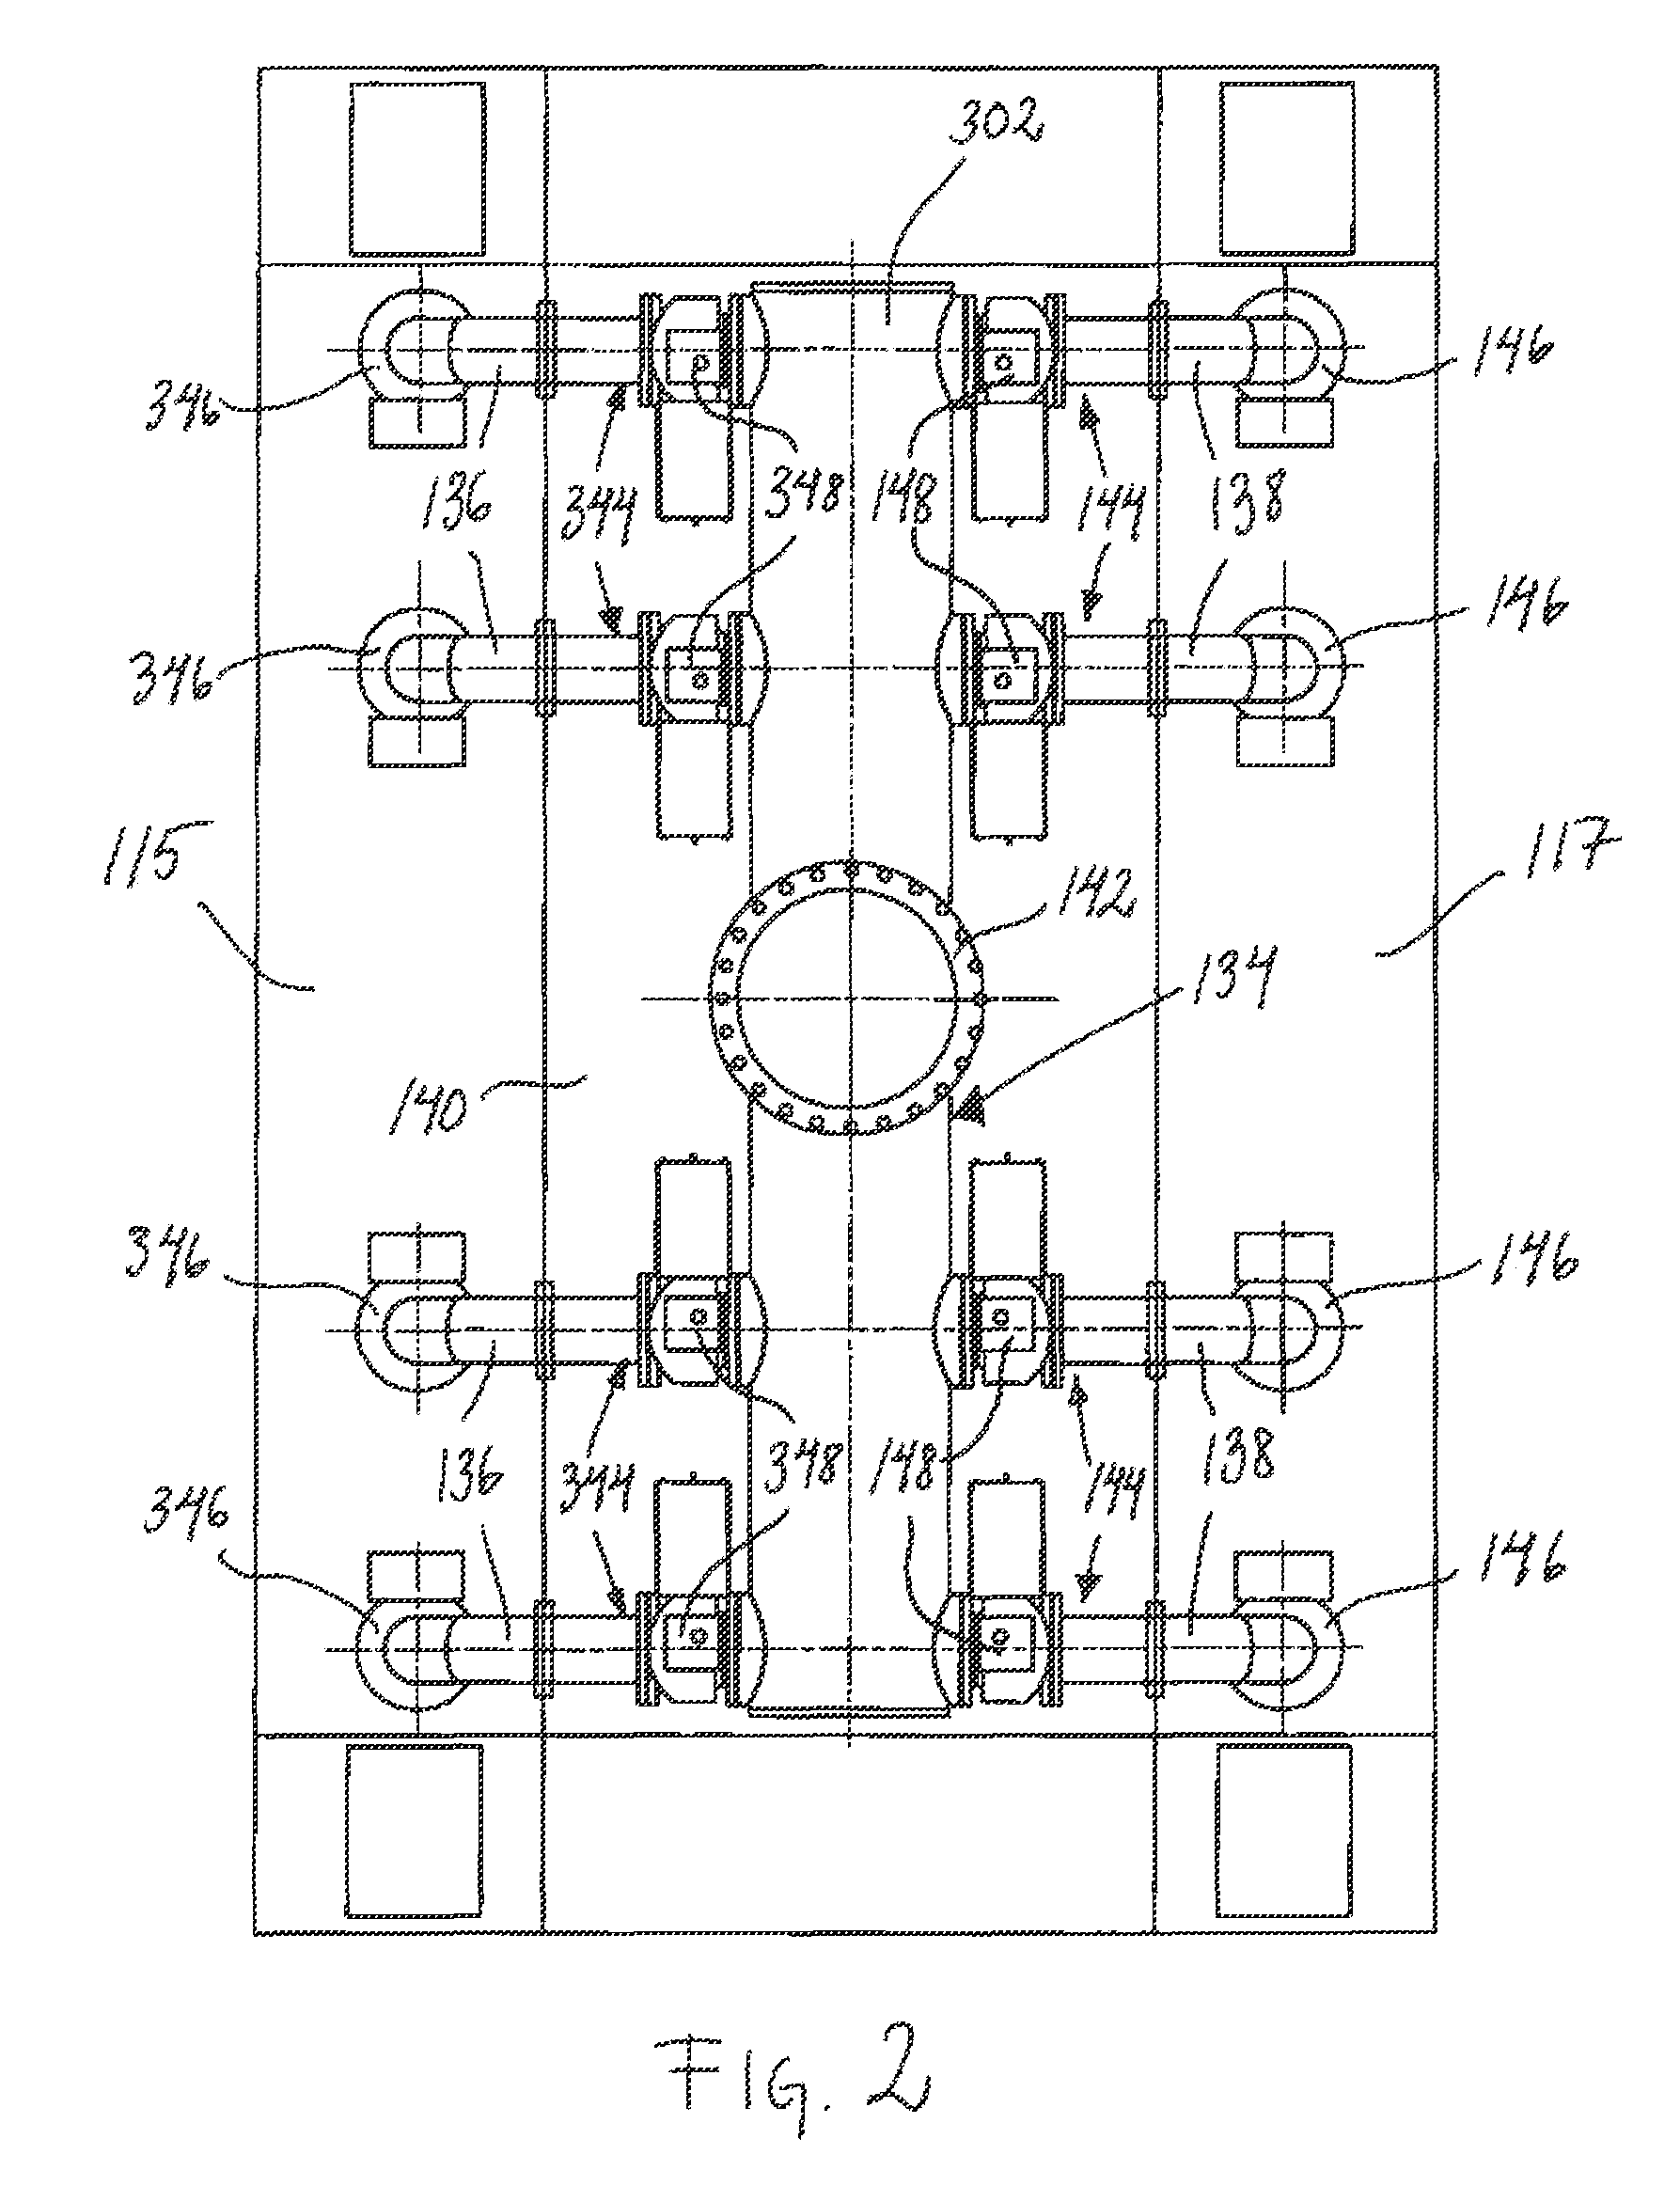 Apparatus for washing and dewatering pulp